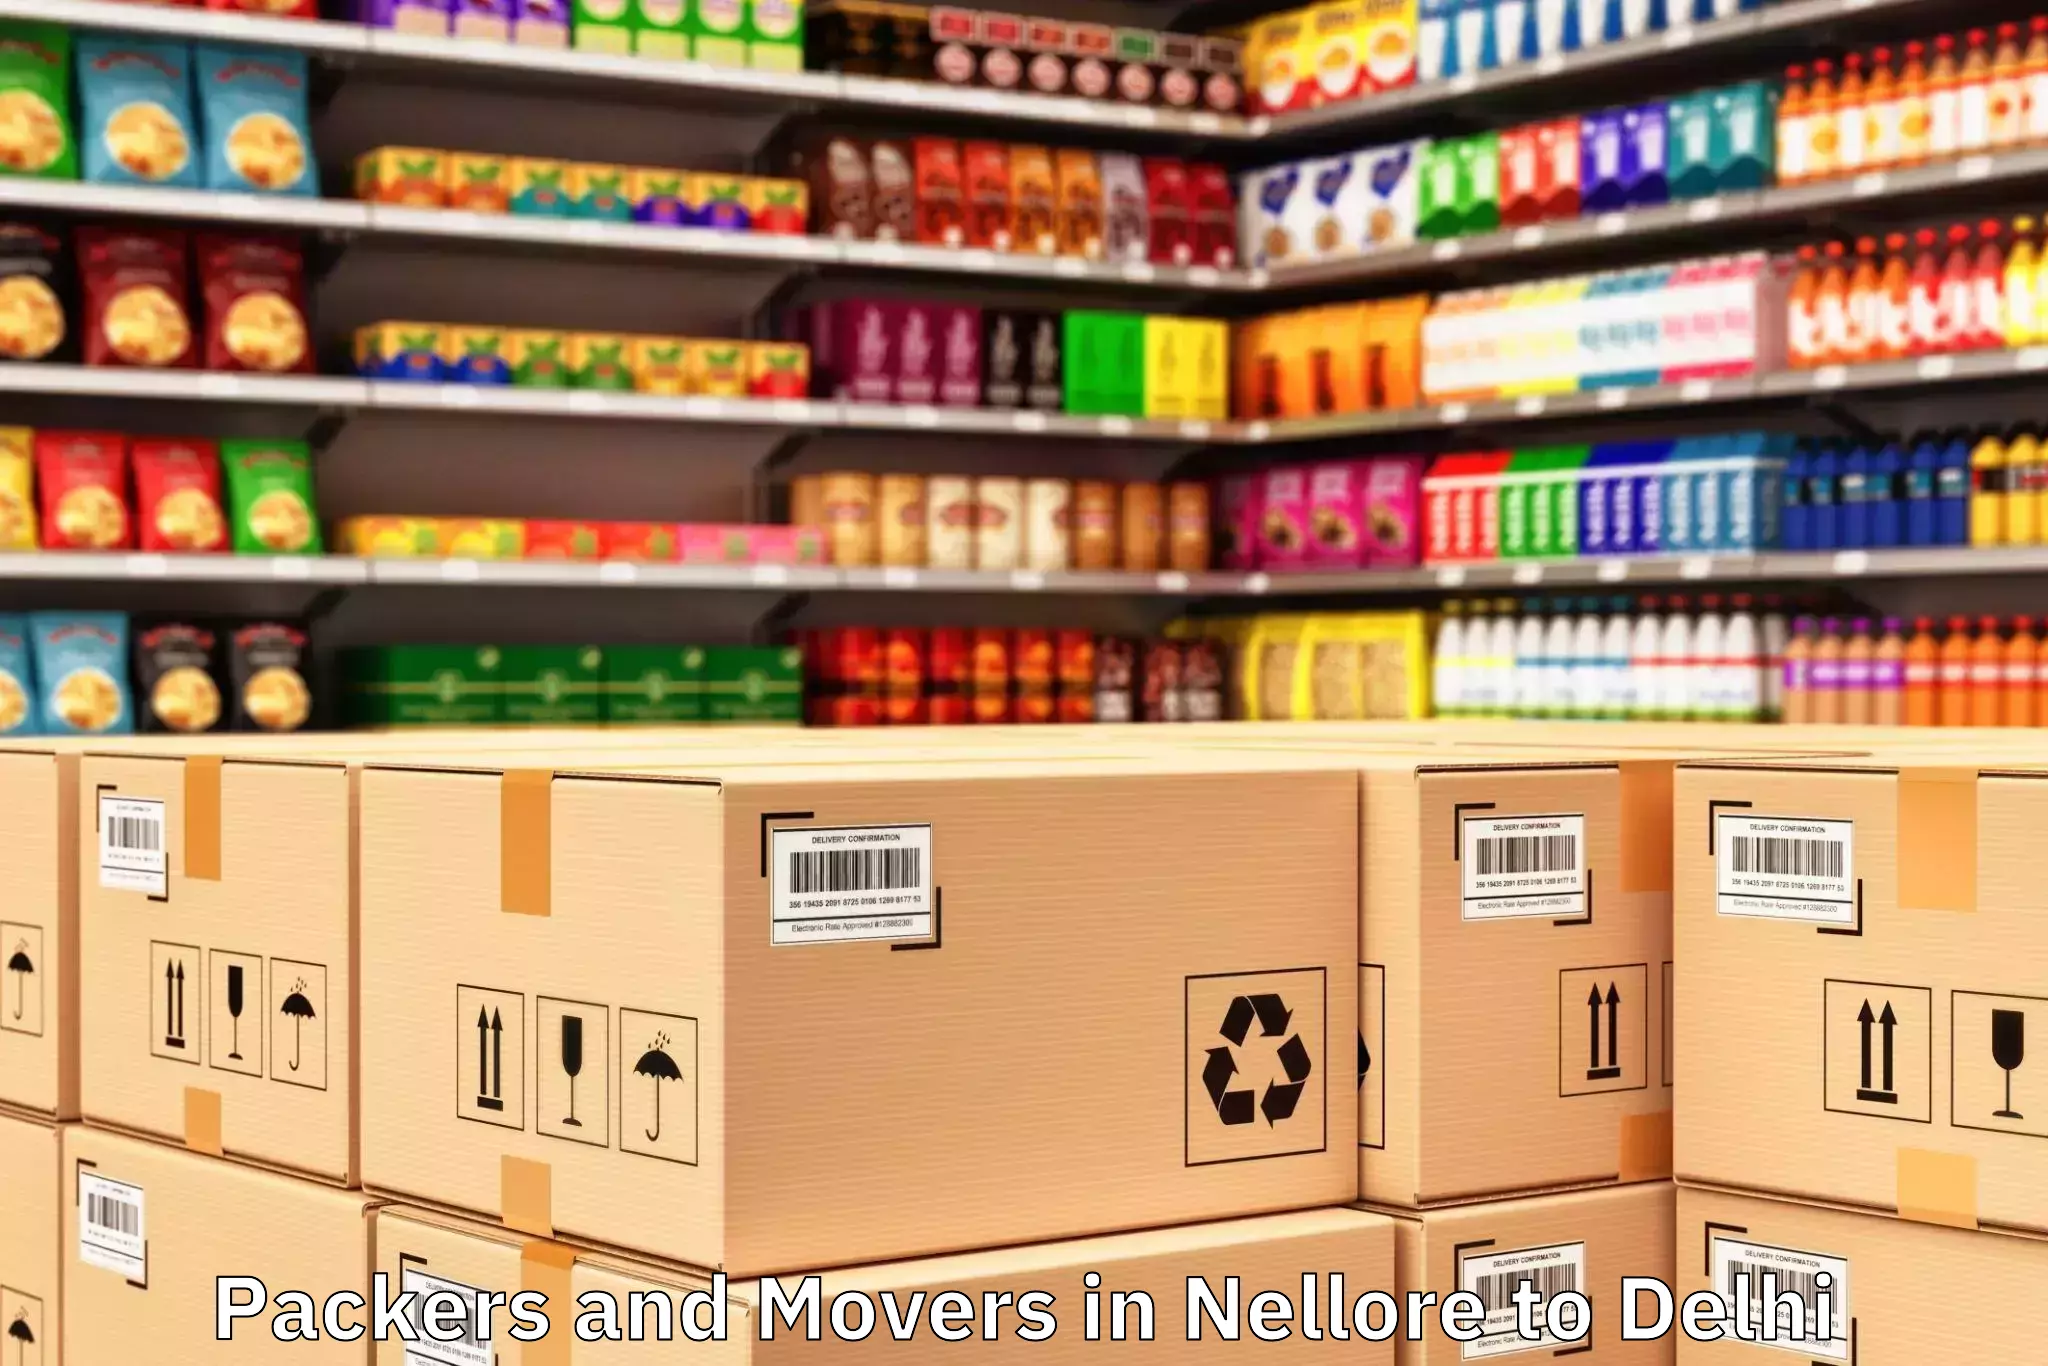 Leading Nellore to Delhi Pharmaceutical Sciences And Research University New Delhi Packers And Movers Provider